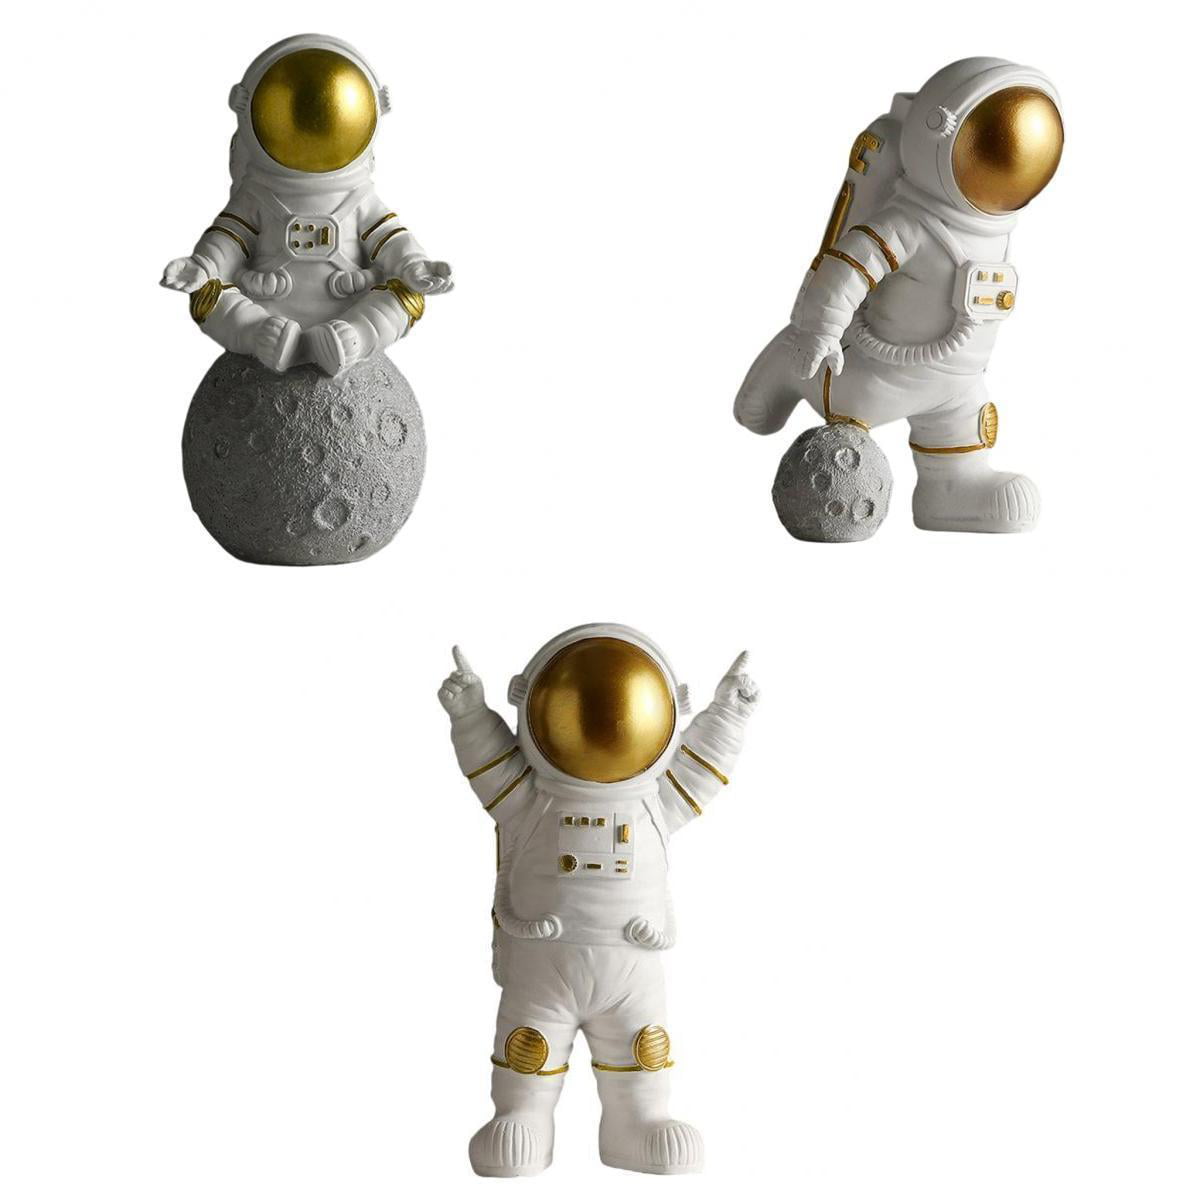 Resin Astronaut Figurines Home Decor Spaceman Collectible Ornament Crafts 